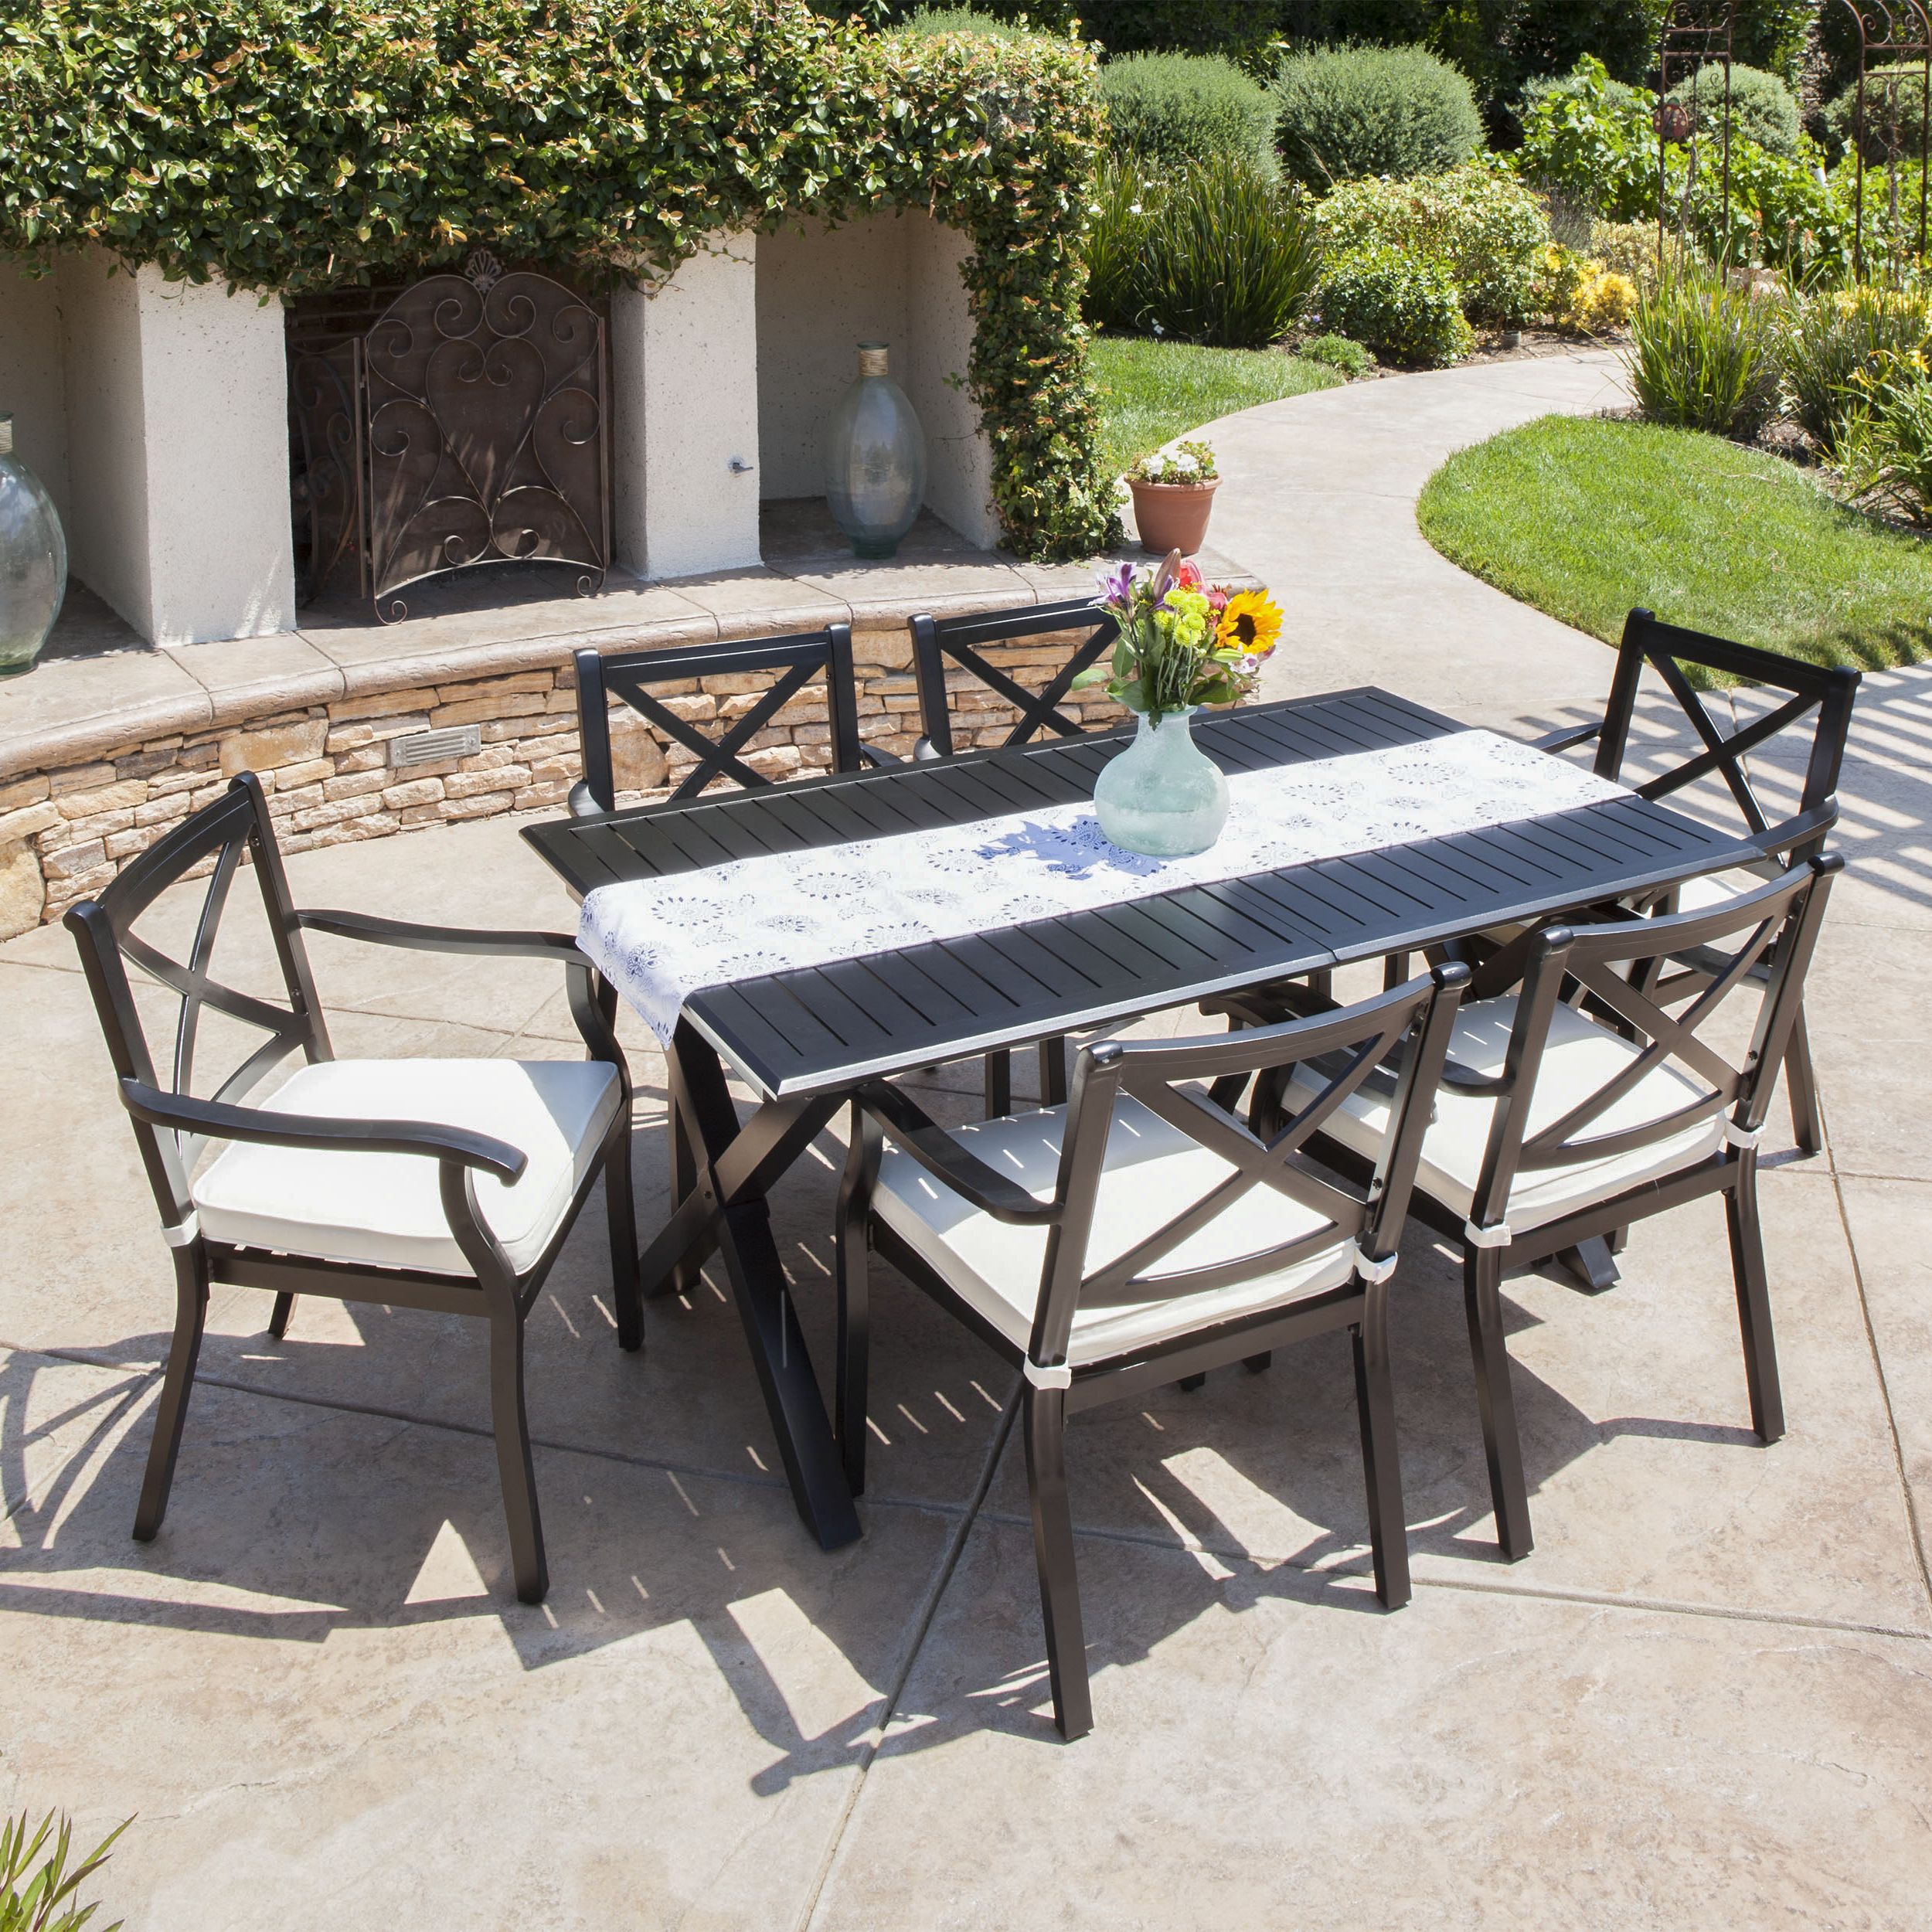 Famous Outdoor Expandable 7 Piece Cast Aluminum Dining Set With Cushions,ivory Regarding Patio Dining Sets With Cushions (View 8 of 15)